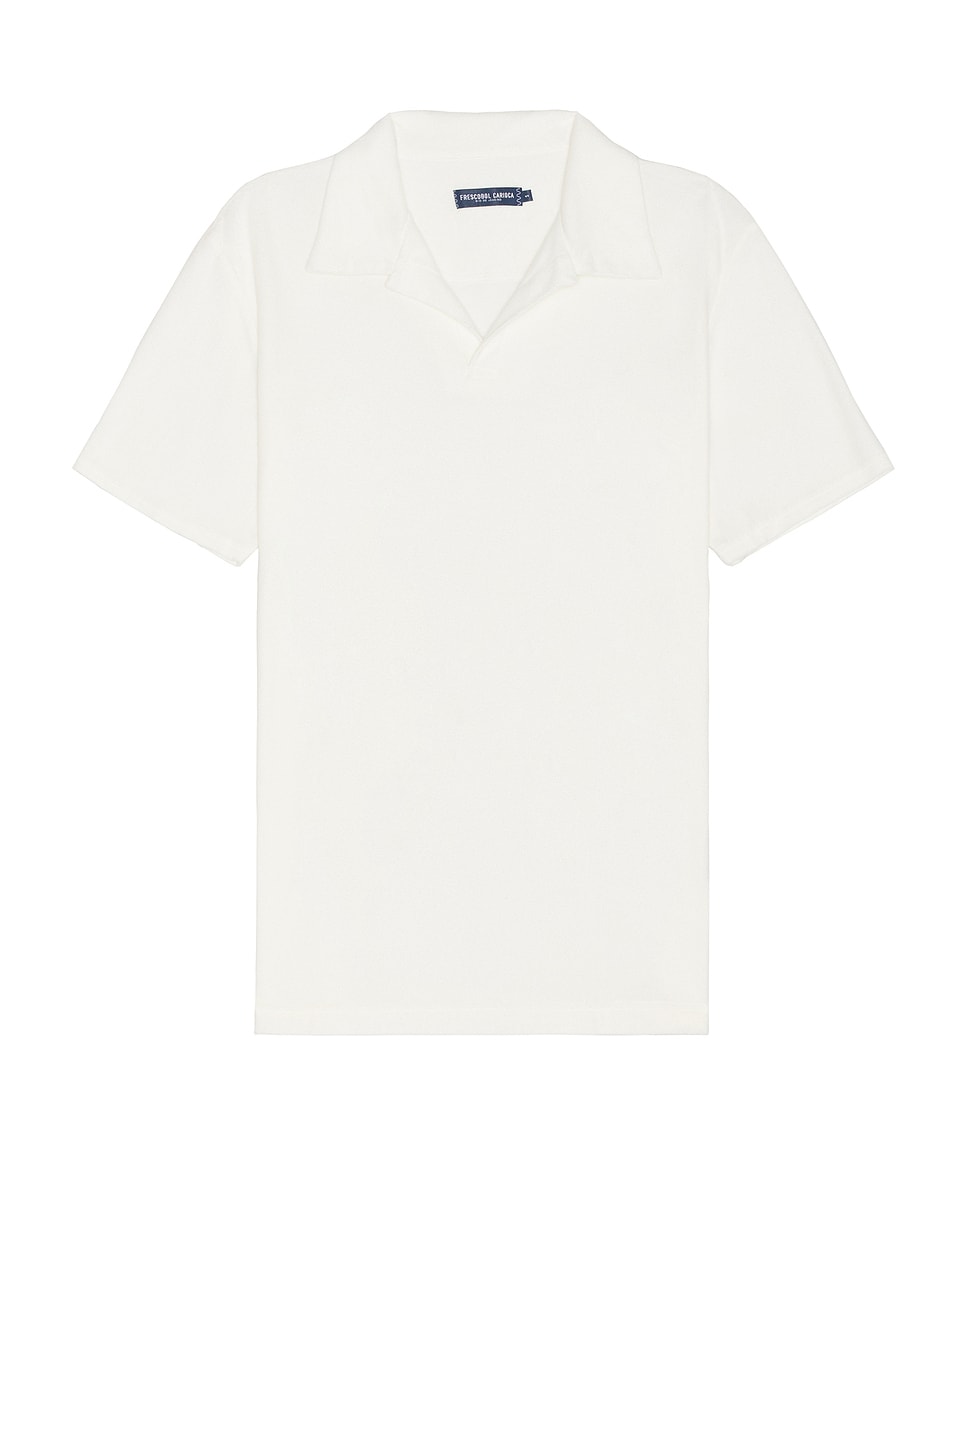 Faustino Terry Cotton Blend Short Sleeve Polo in Ivory